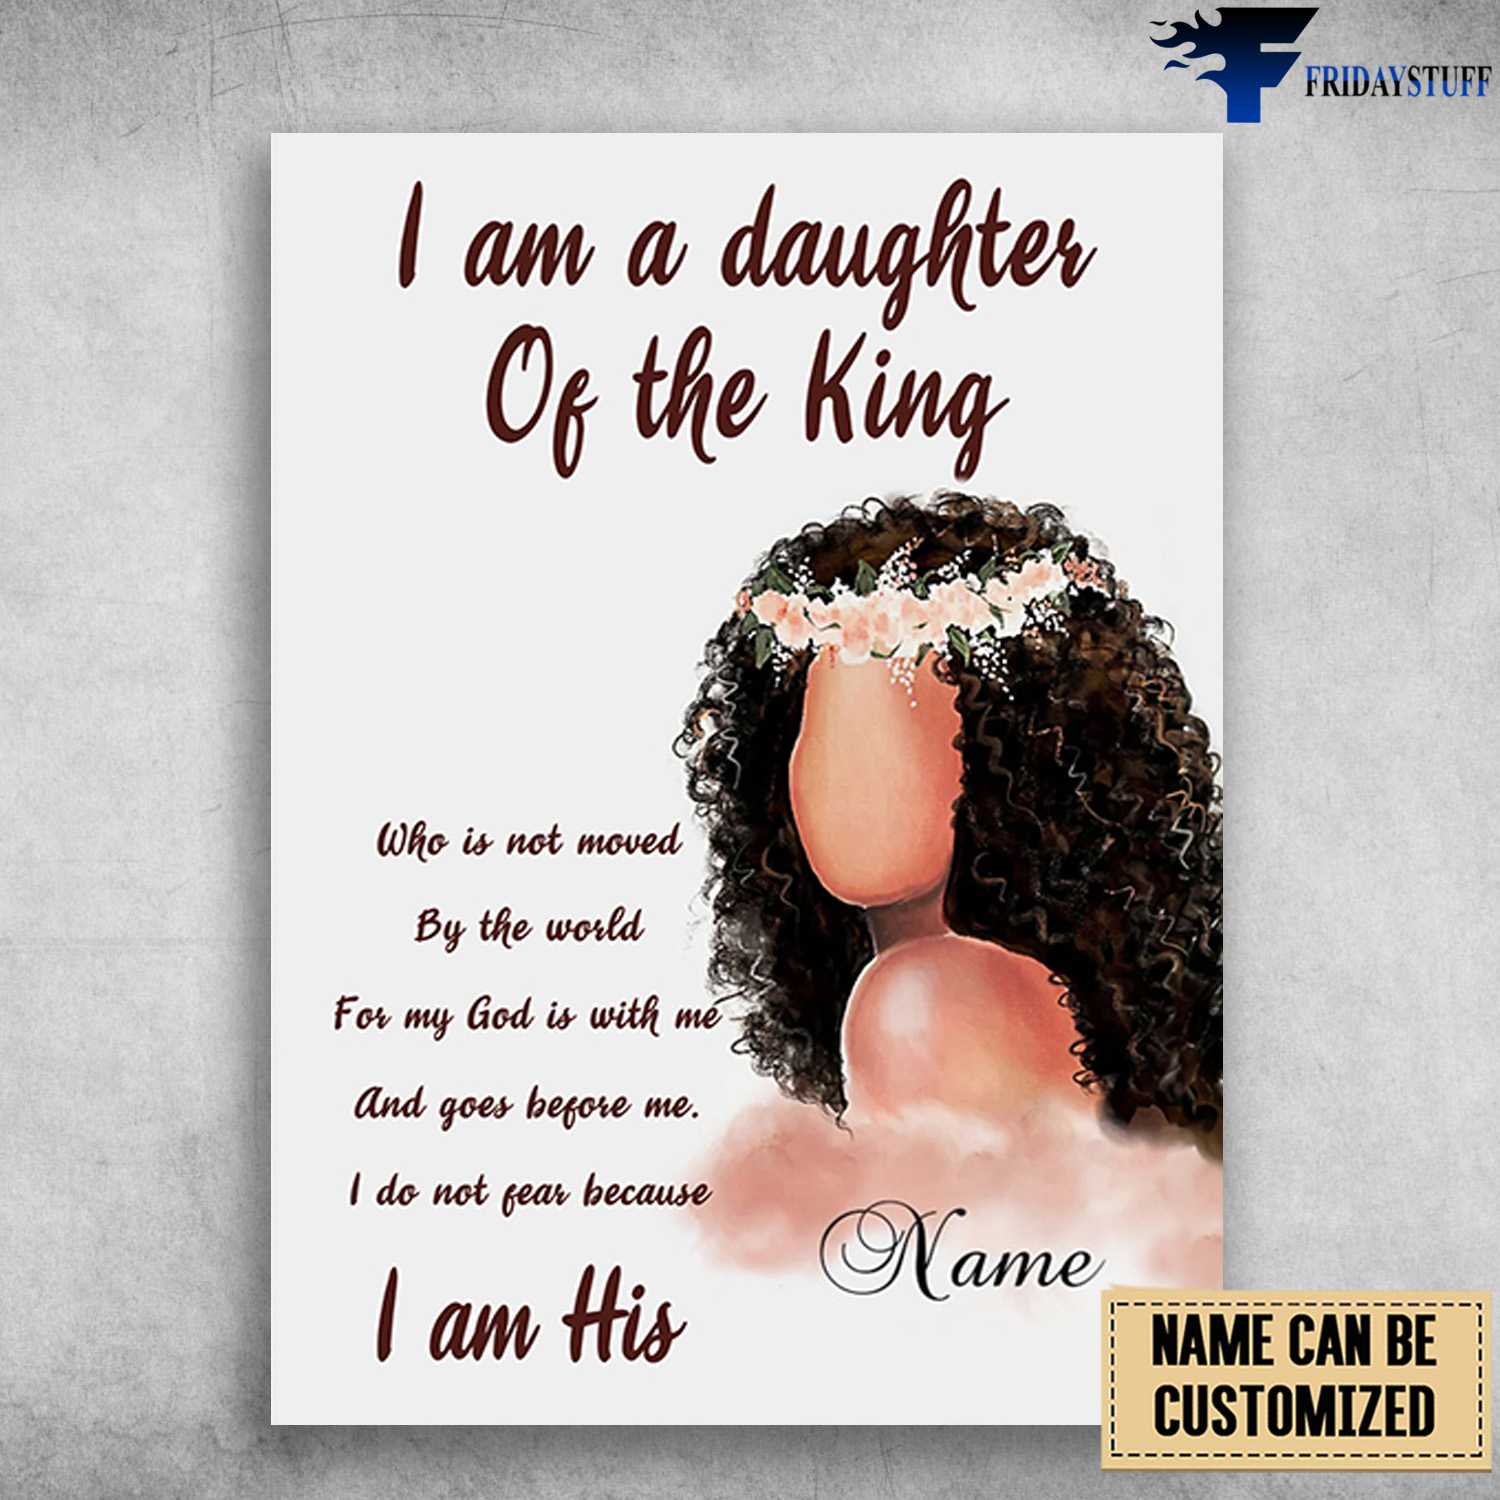 Black Girl, Beautiful Girl, I Am A Daughter Of The King, Who Is Not Moved, By The World, For My God Is With Me, And Goes Before Me, I Do Not Fear Because I Am His